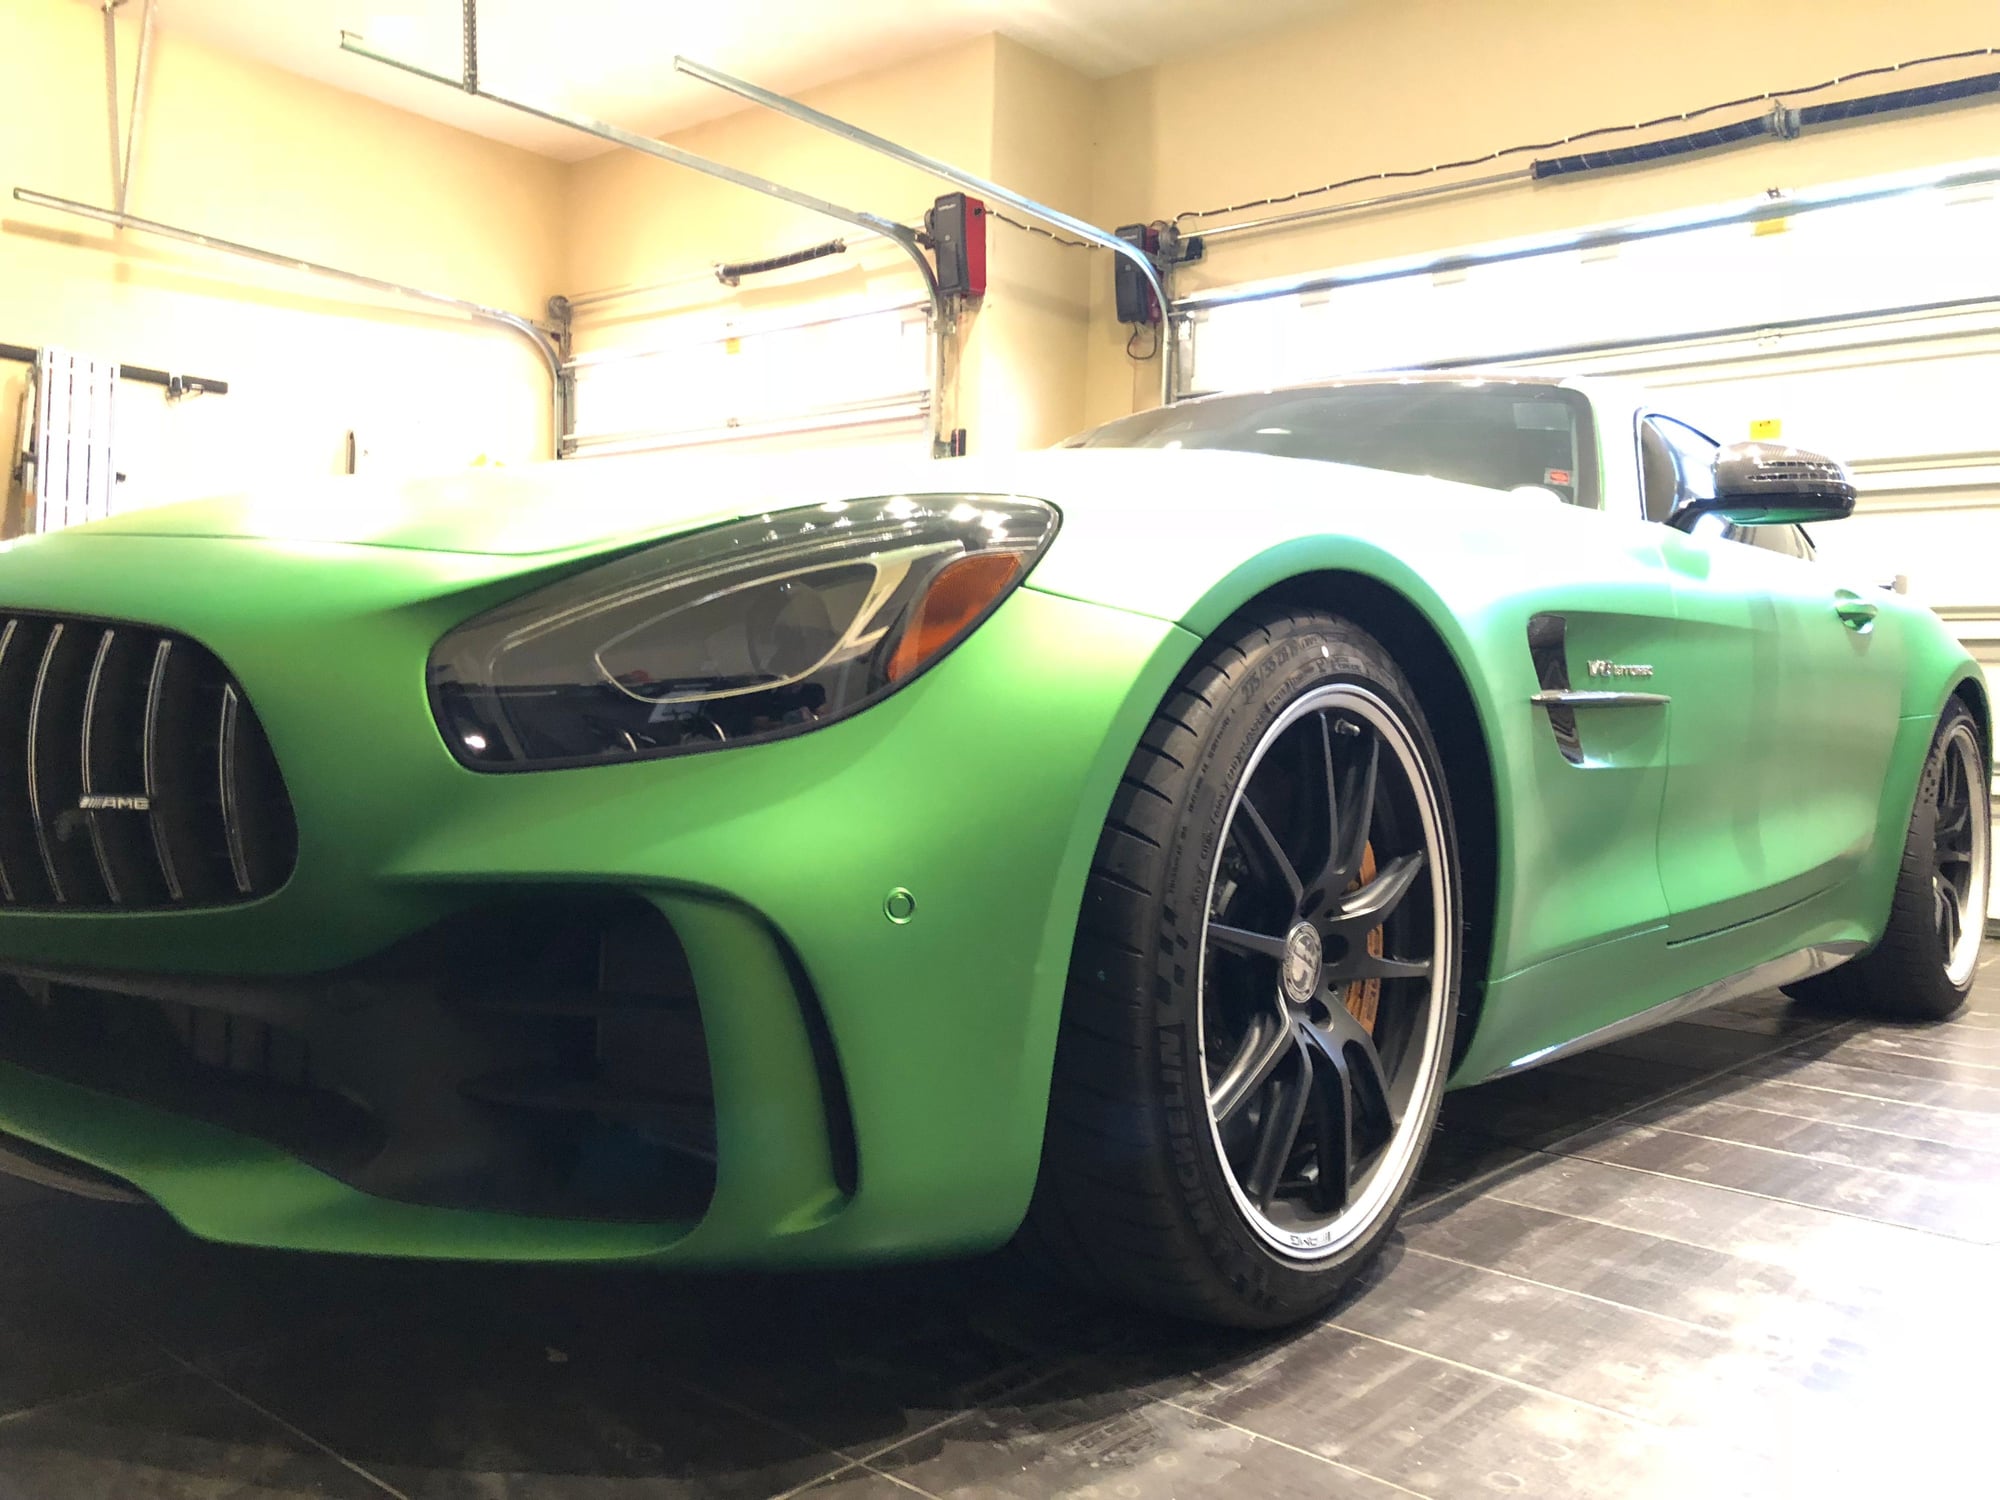 2018 Mercedes-Benz AMG GT R - 2018 Mercedes-Benz AMG GTR Coupe MSRP $205k+ AMG Green Hell Magno - Used - VIN WDDYJ7KA4JA019098 - 3,900 Miles - 8 cyl - 2WD - Automatic - Coupe - Other - Golden, CO 80403, United States